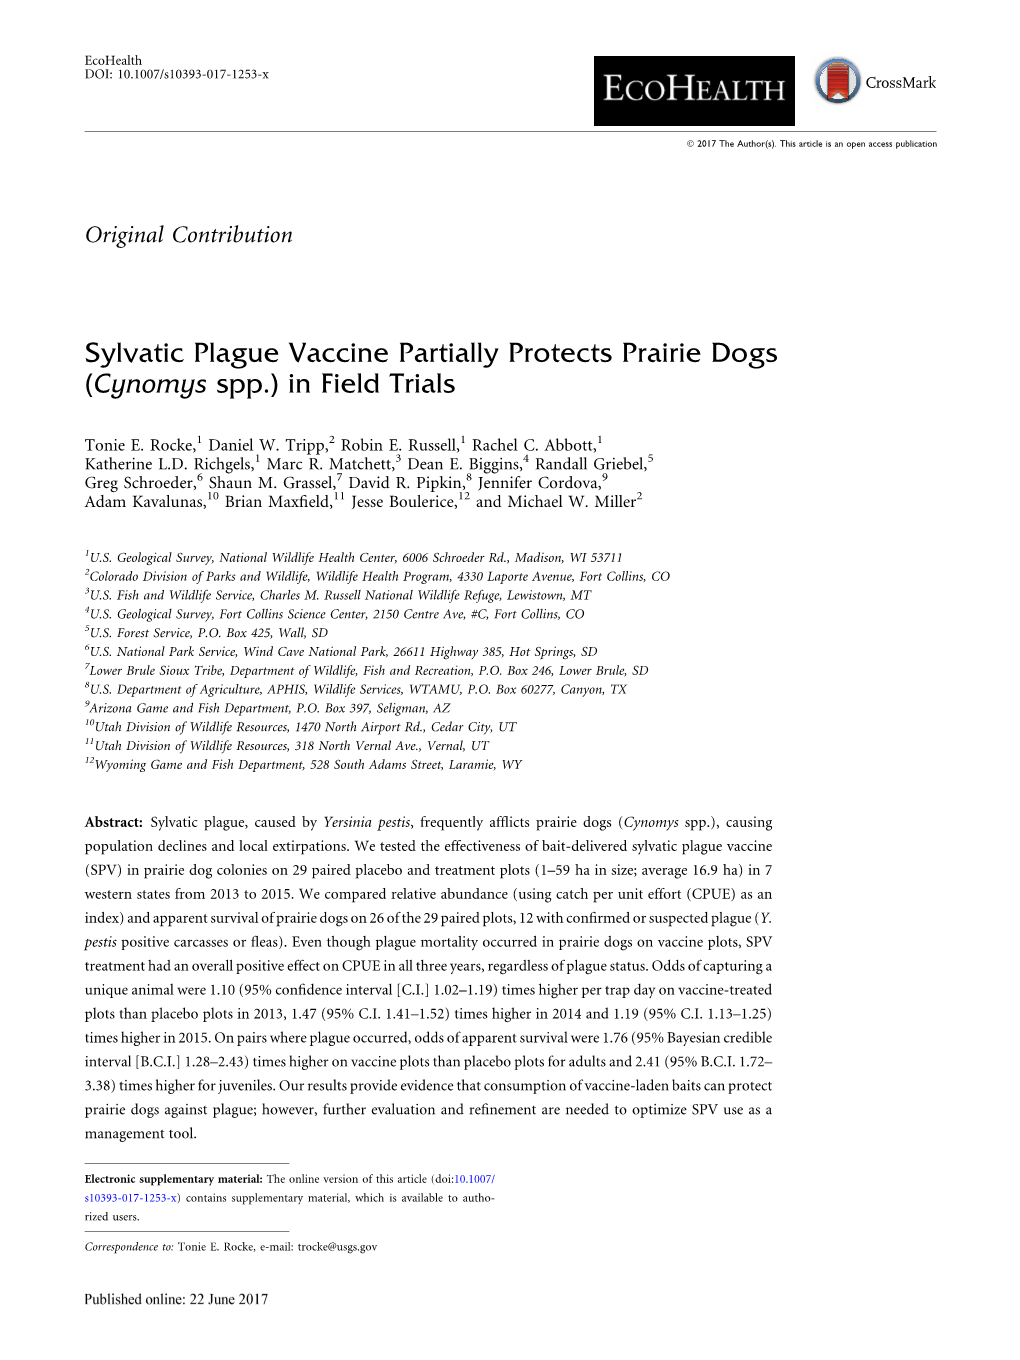 Sylvatic Plague Vaccine Partially Protects Prairie Dogs (Cynomys Spp.) in Field Trials